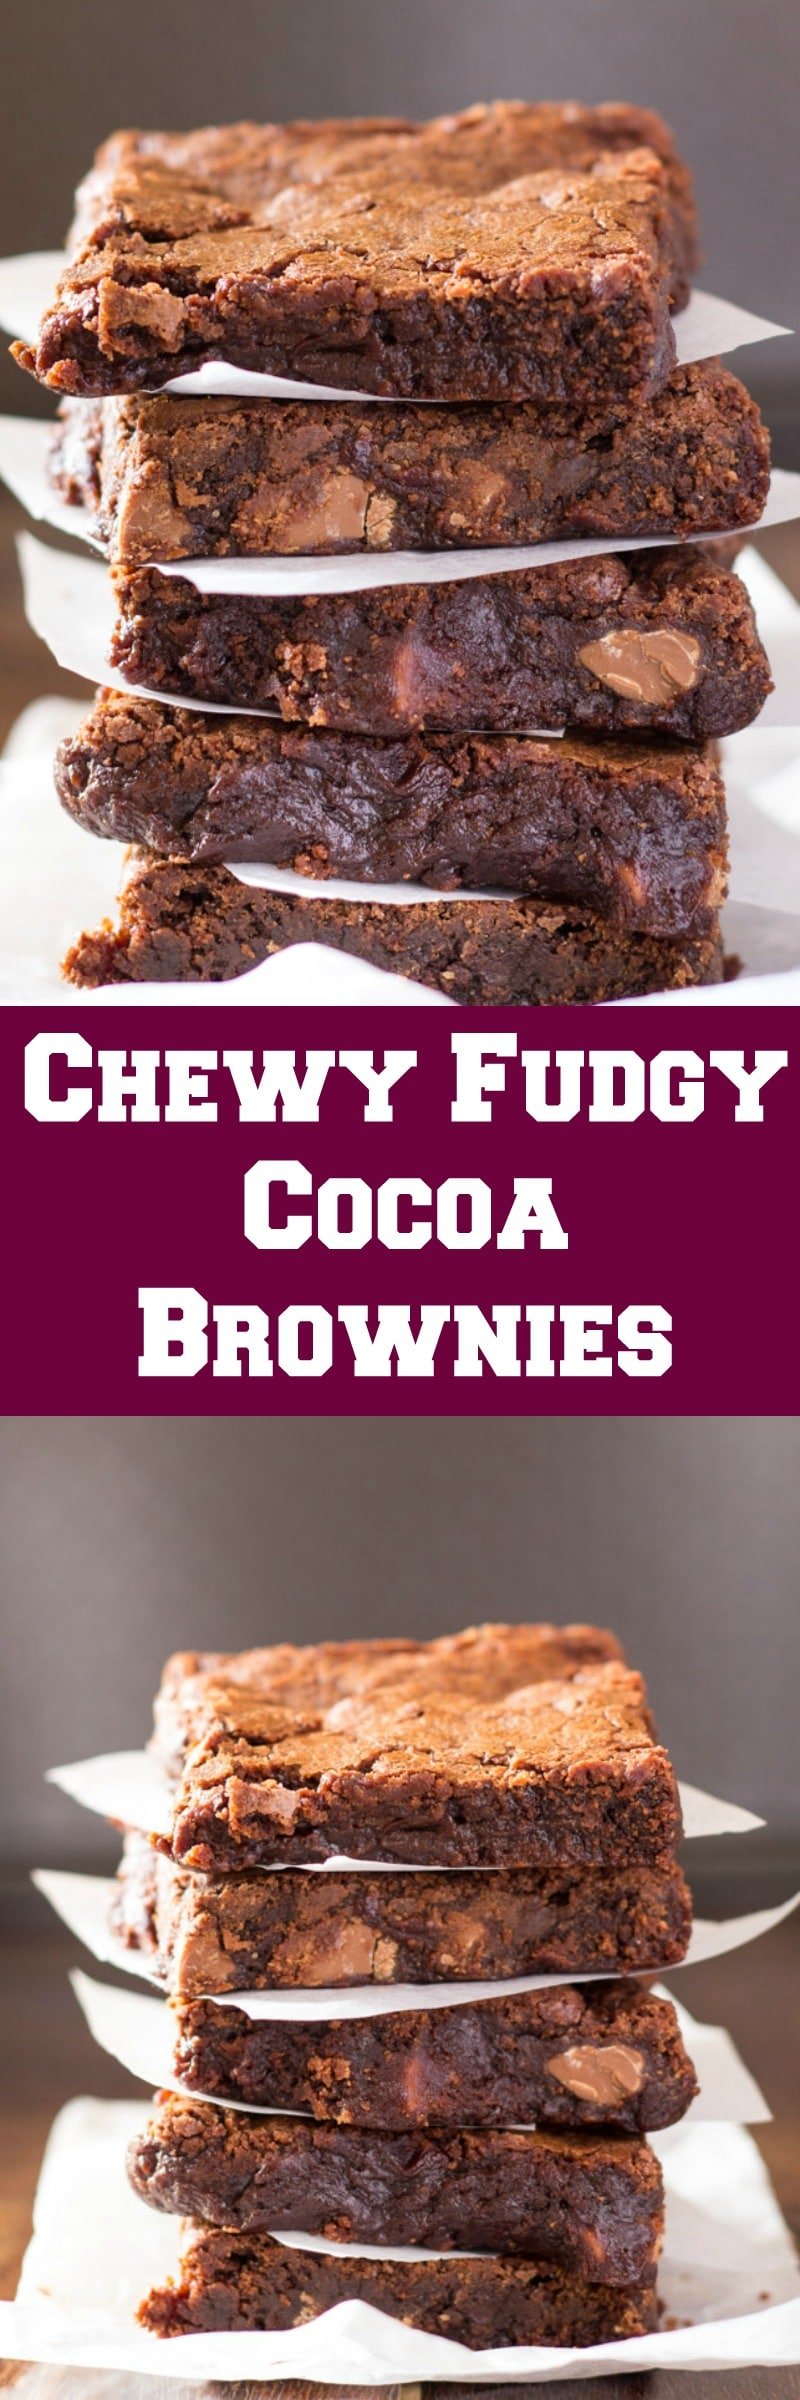 Chewy Fudgy Cocoa Brownies